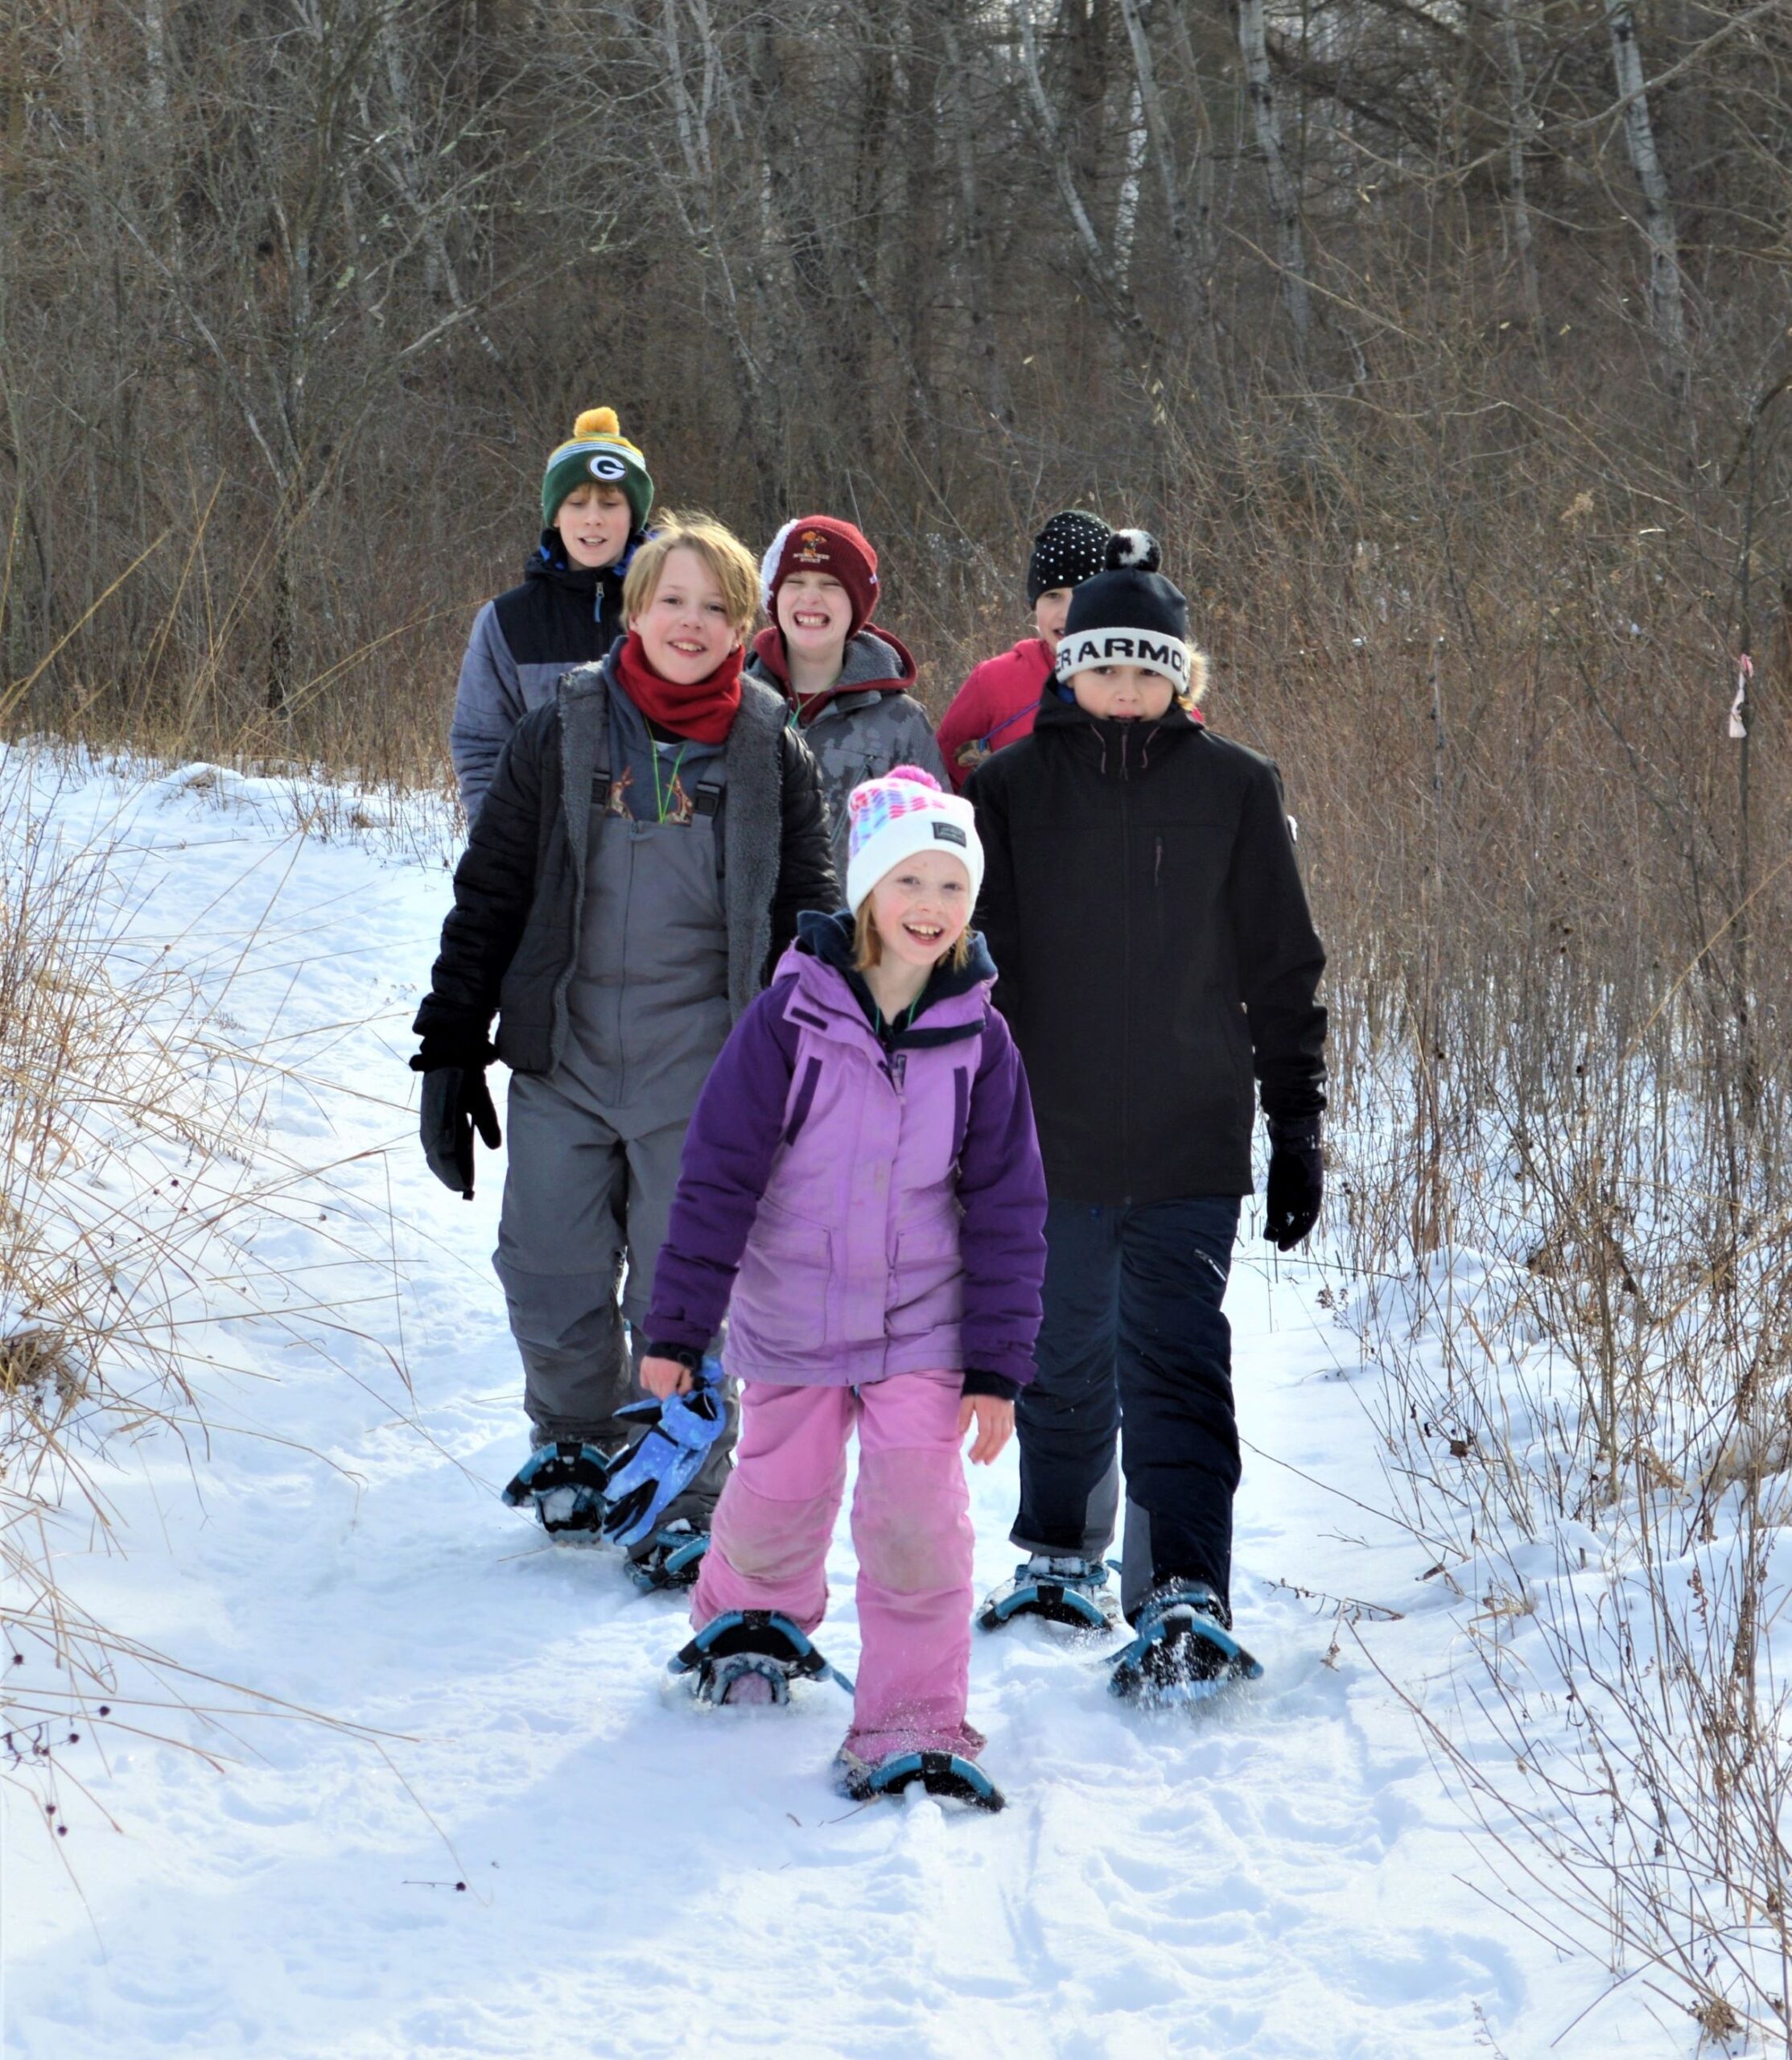 6 kids of varying ages dressed in winter gear snowshoeing on a snow covered trail through the Riveredge prairie